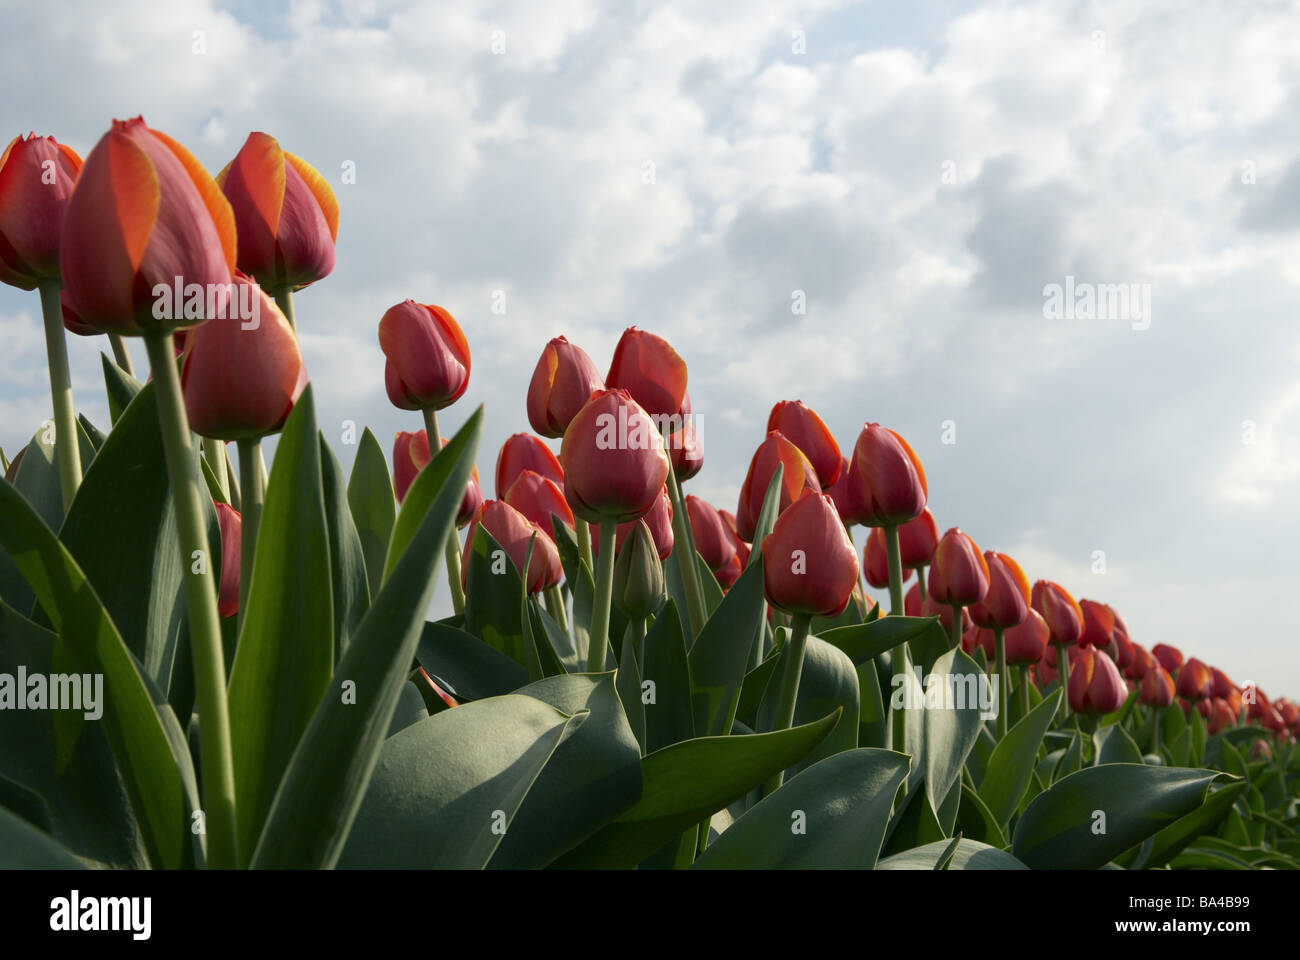 Tulip-field detail tulips blooms leaves red green salmon-colored heaven clouds blue from below row 04/2006 build an extension Stock Photo